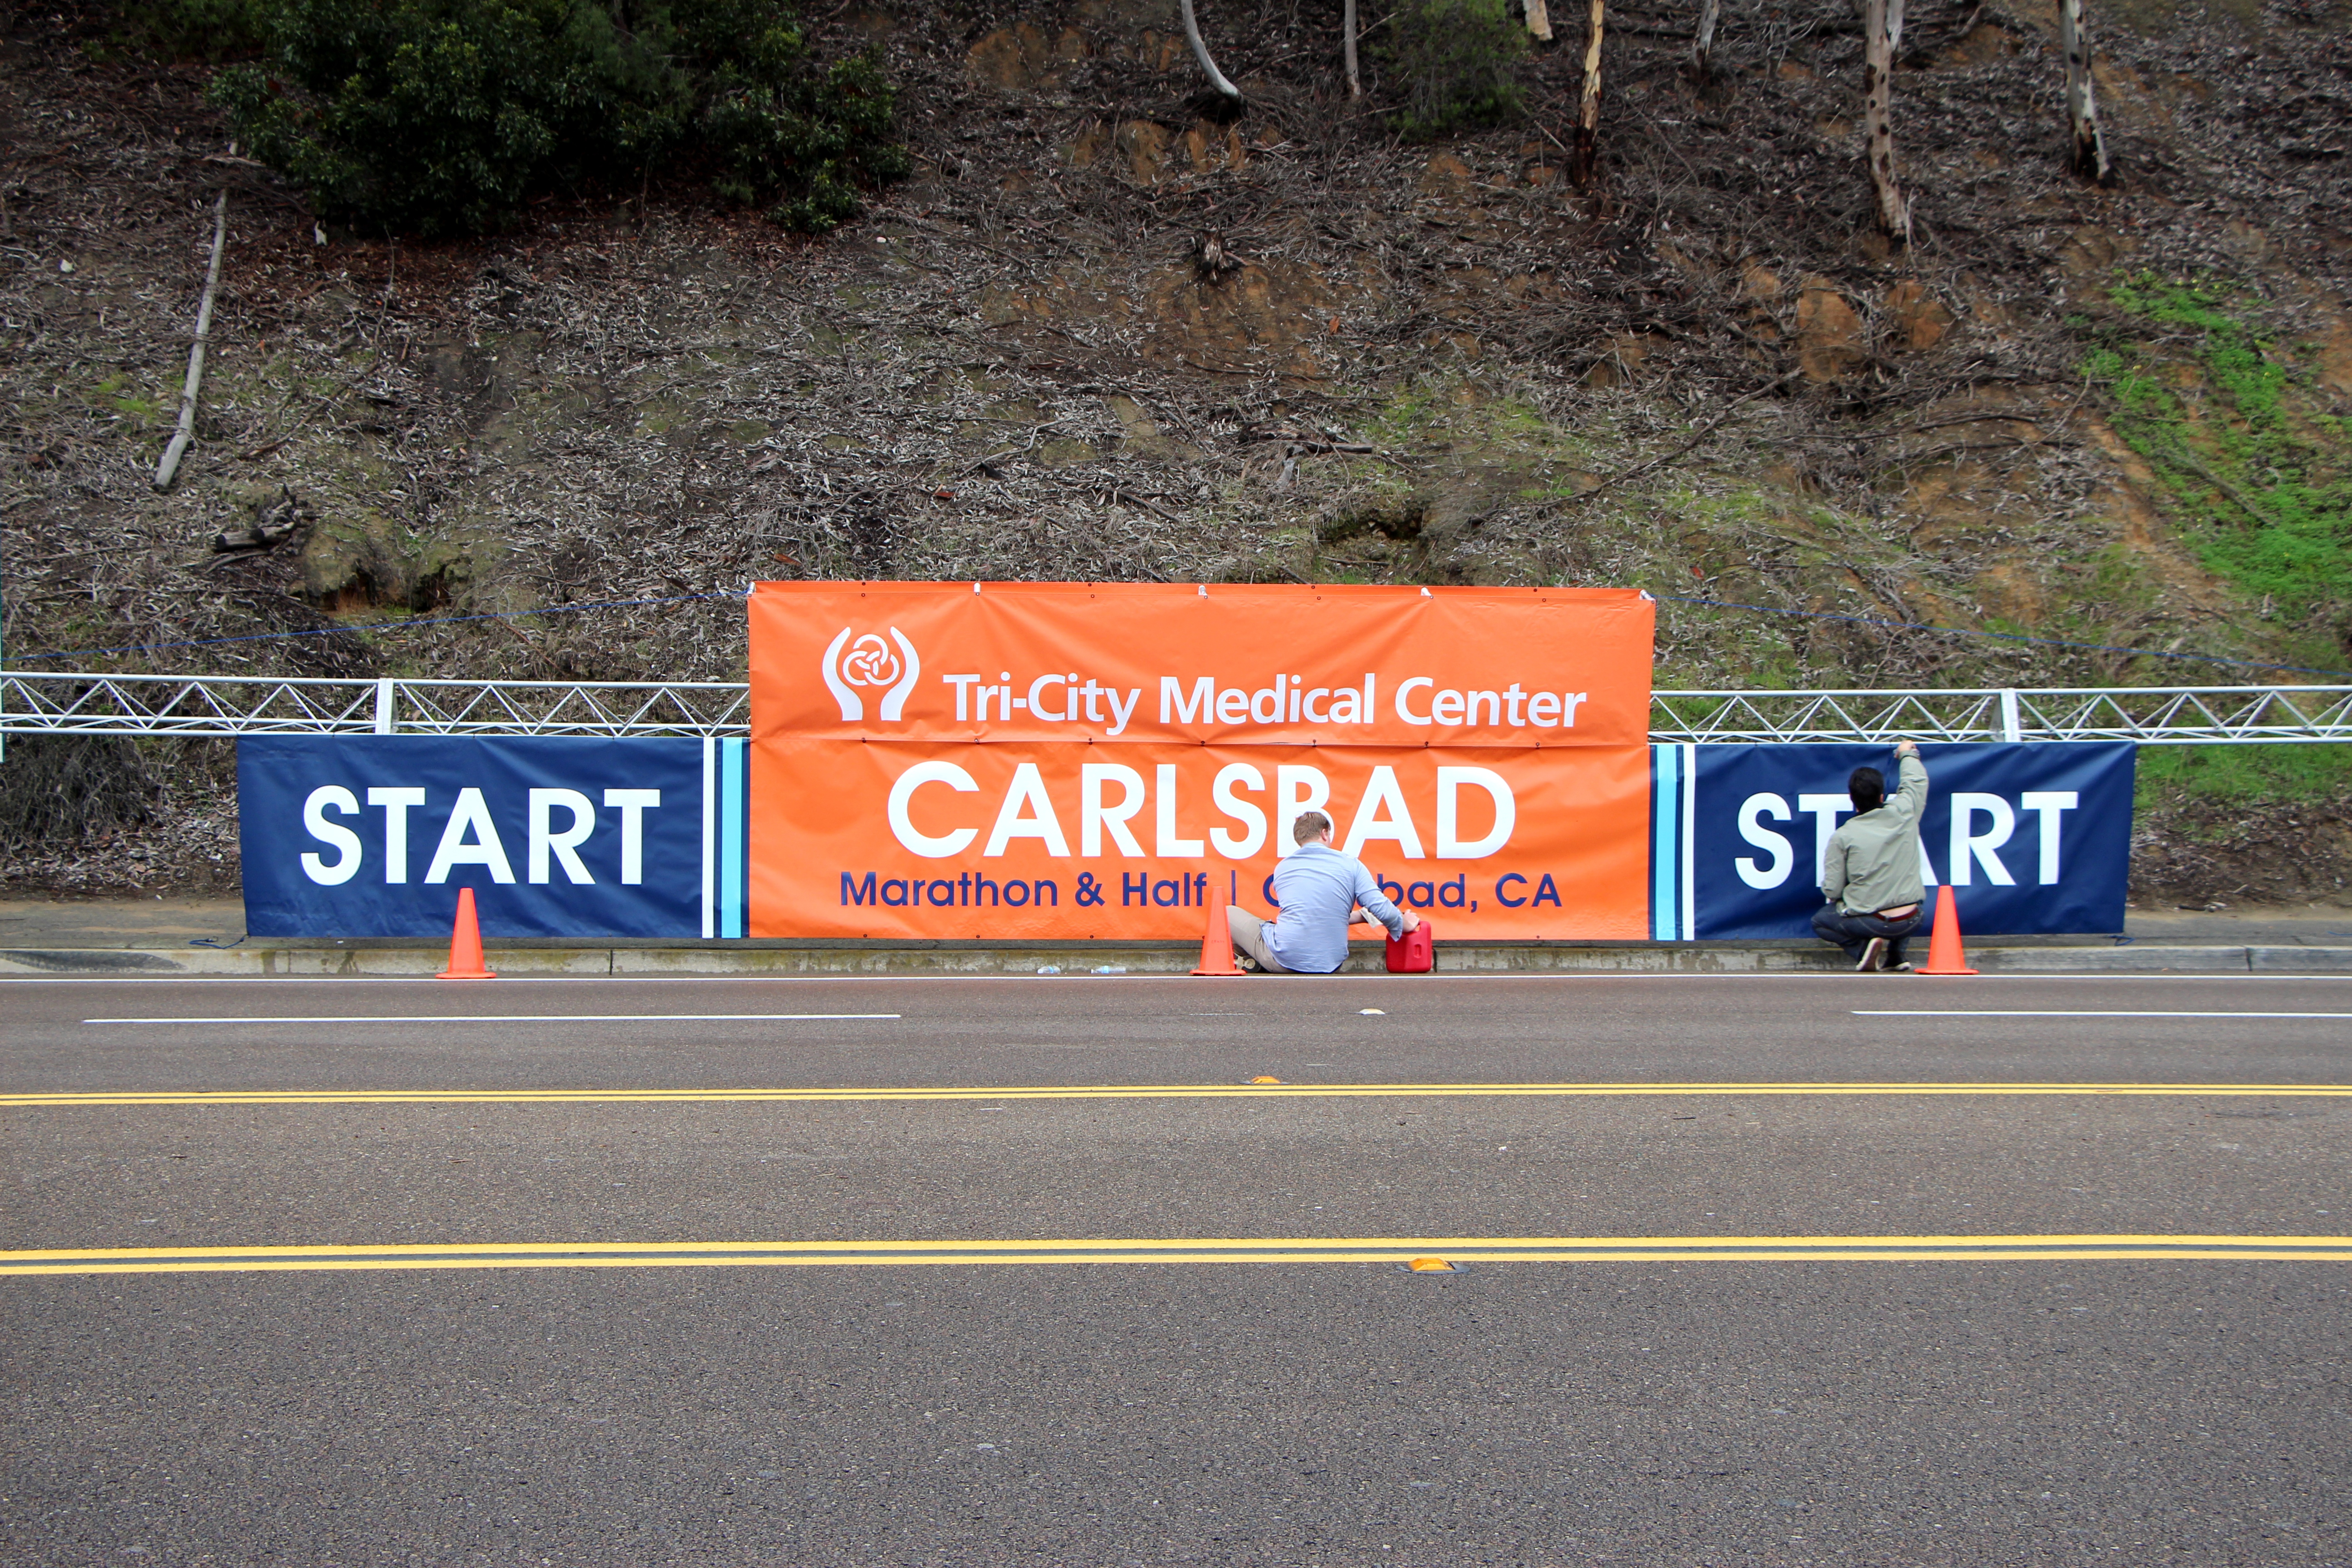 Workers clean the sign used at the Start of the Carlsbad Half Marathon